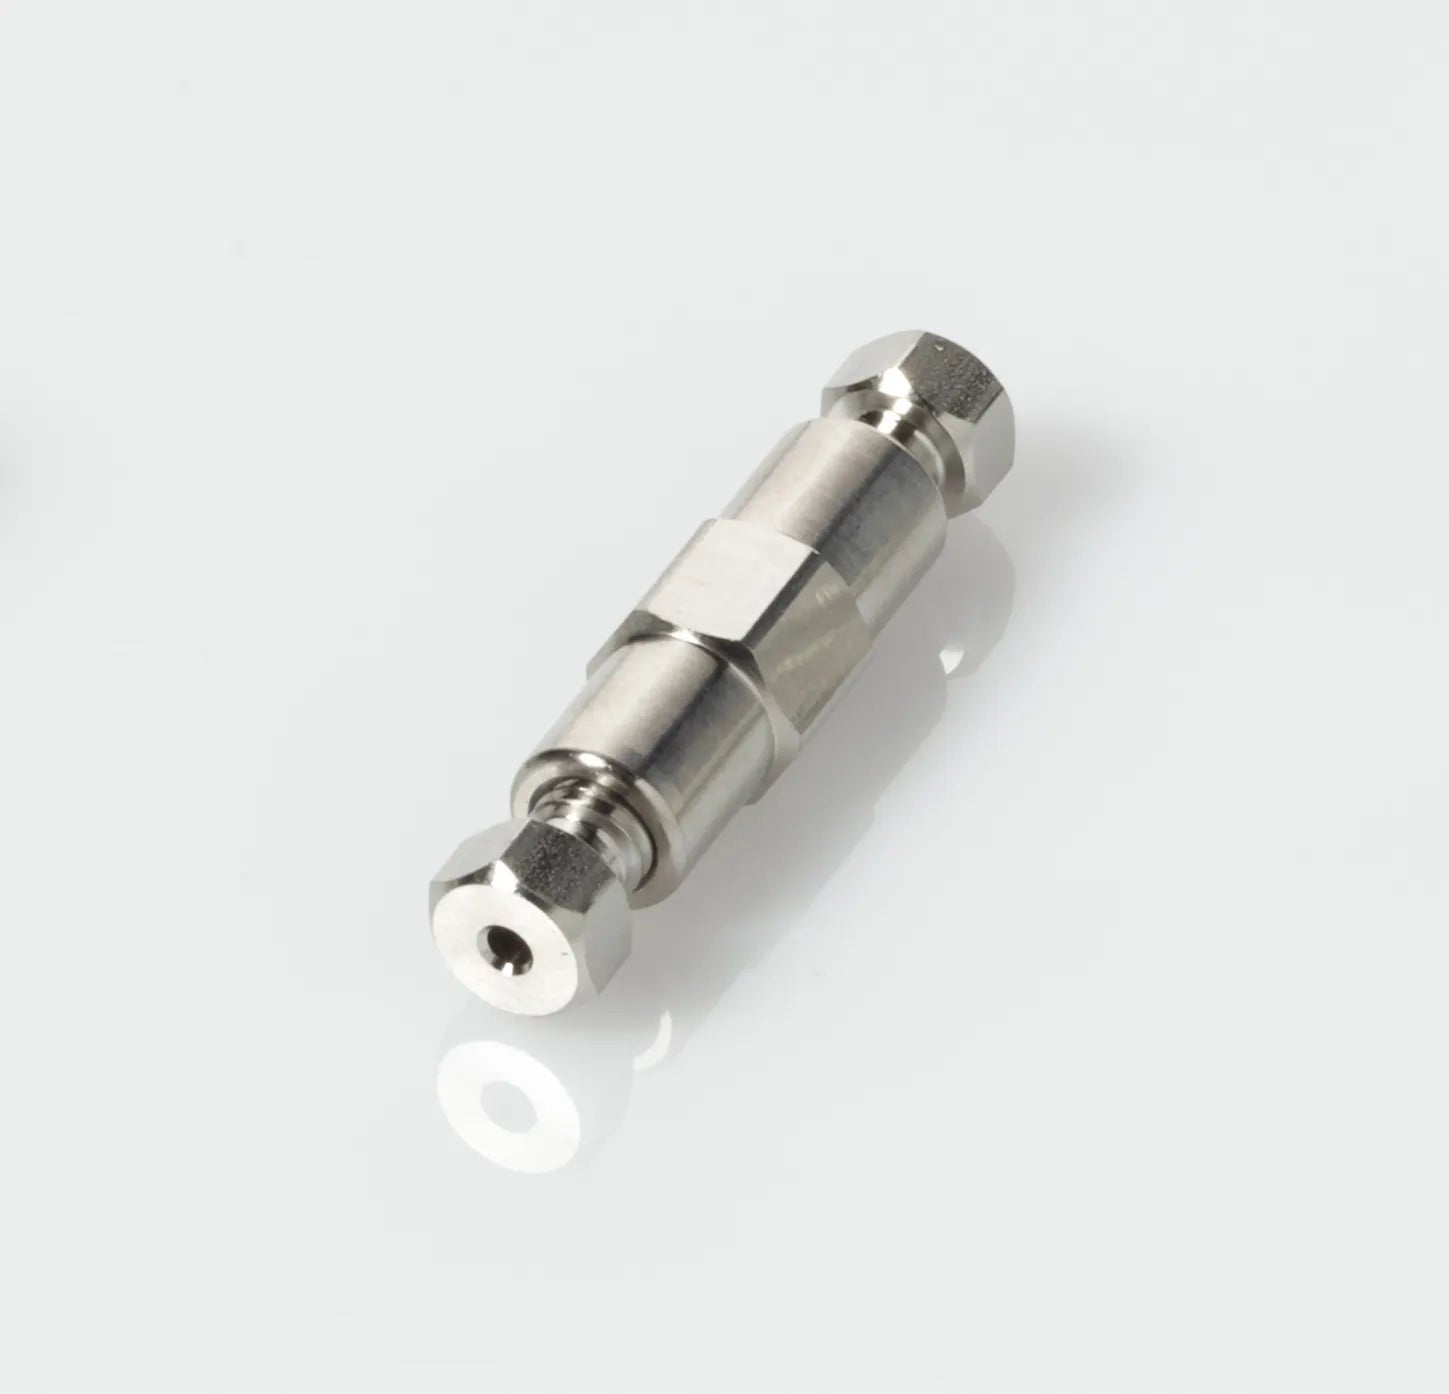 Connector Union ZDV Stainless Steel 0.020" (0.50mm) Thru-Hole for 1/16" OD Tubing (Union + Fittings)